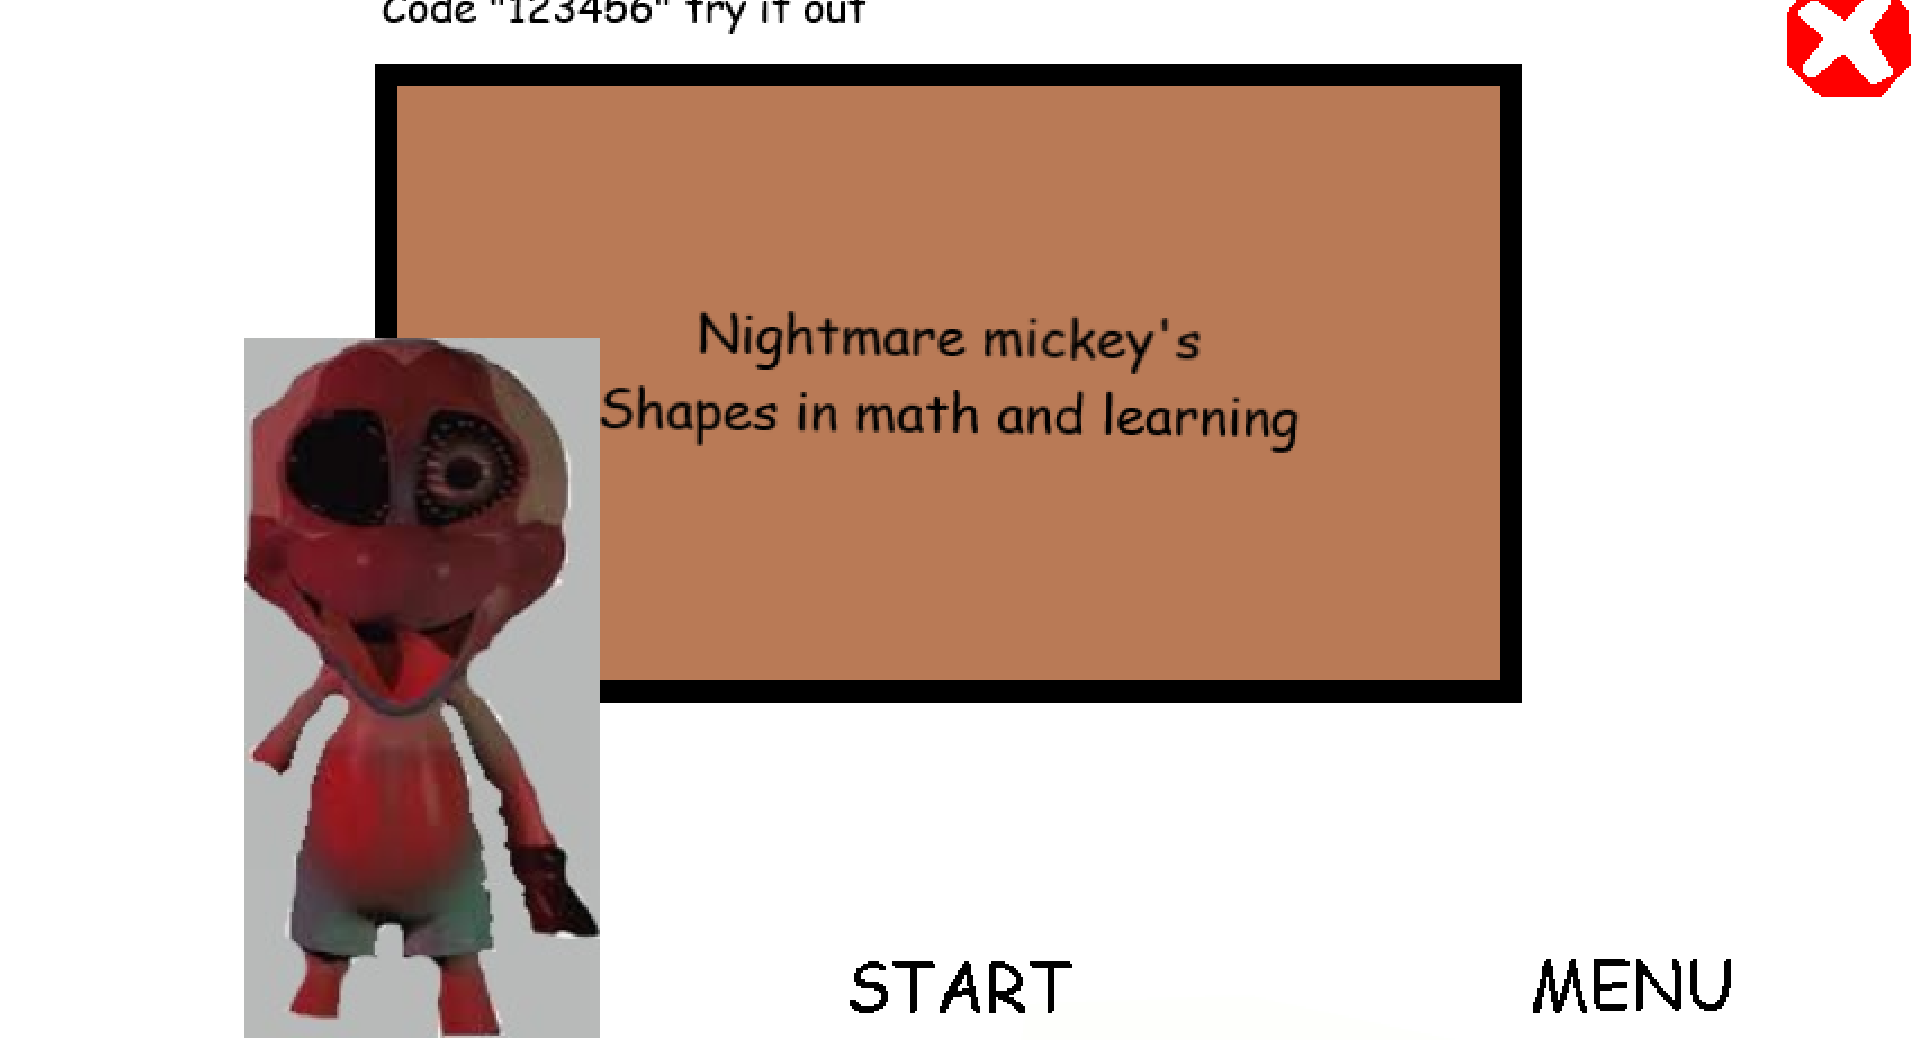 Nightmare mickey's shapes in math and learning (Baldi's basics v1.4.3 mod)